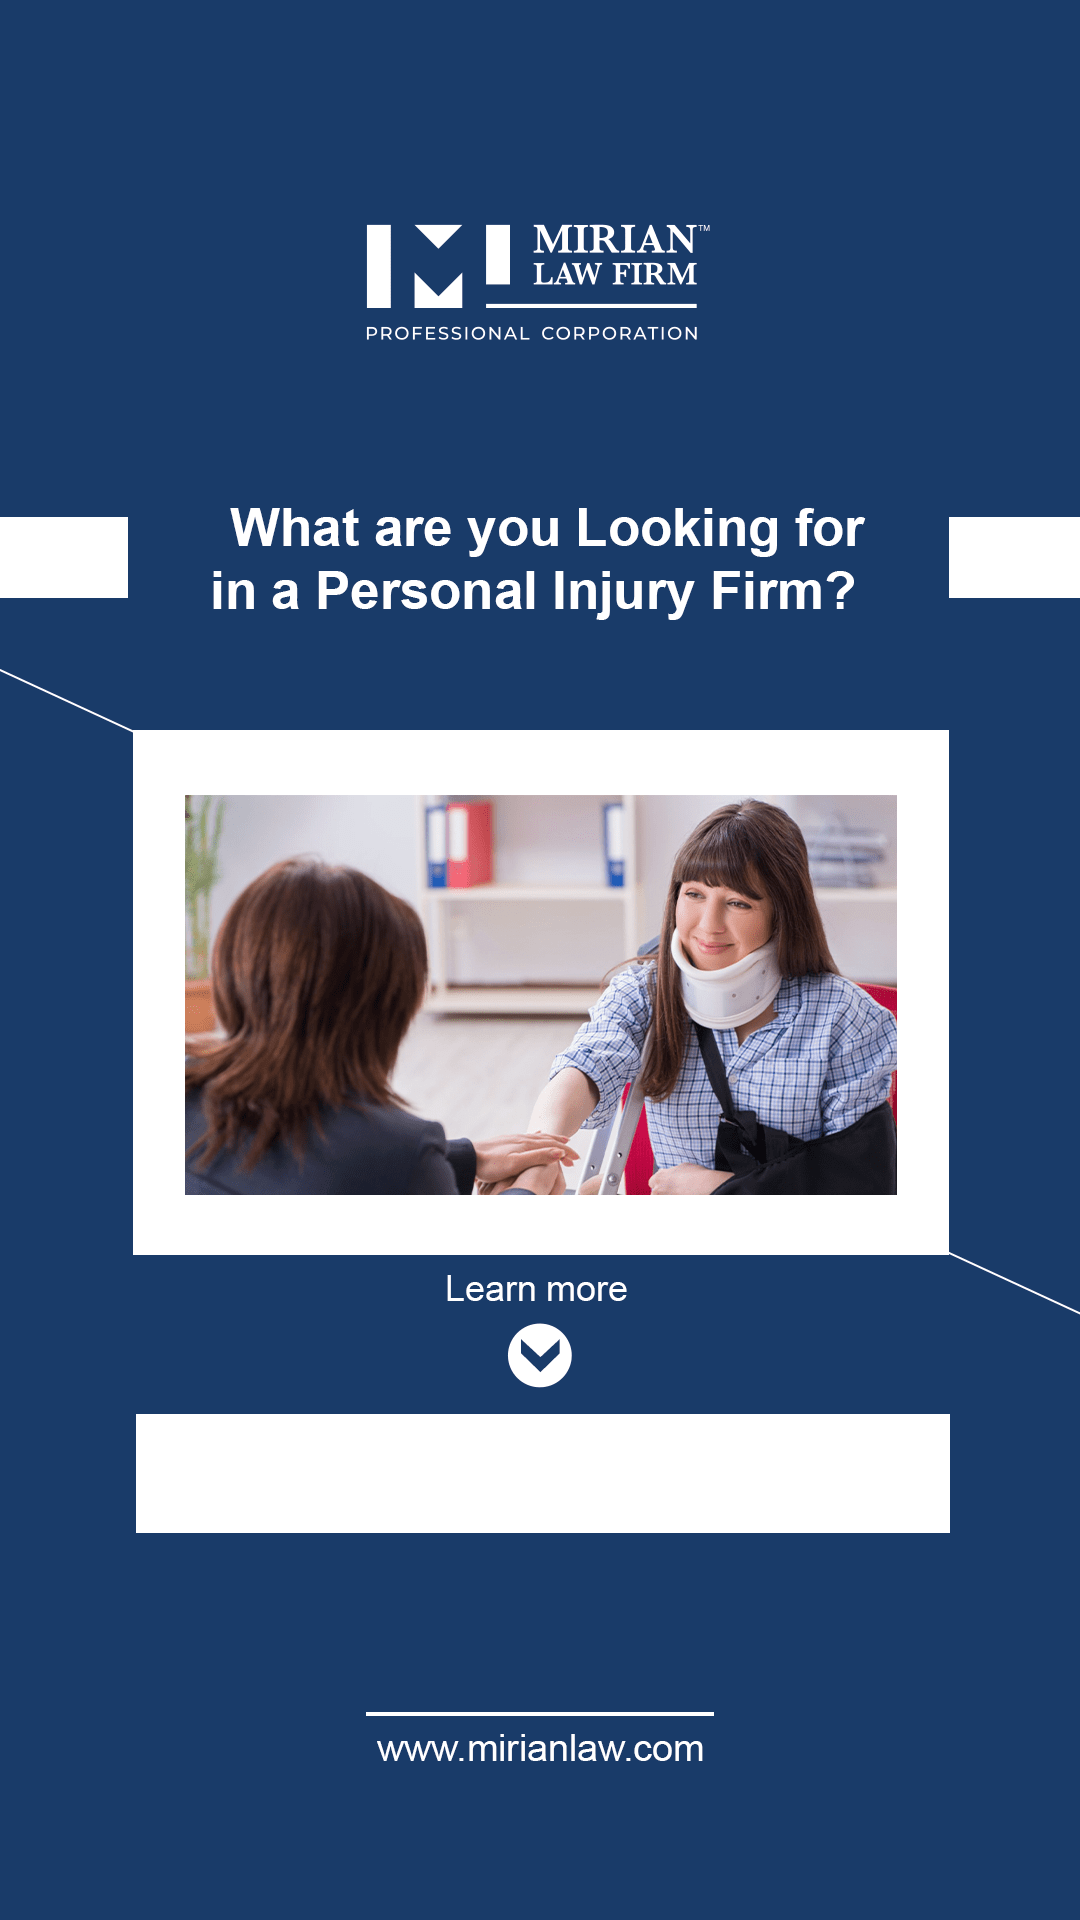 What are you Looking for in a Personal Injury Firm